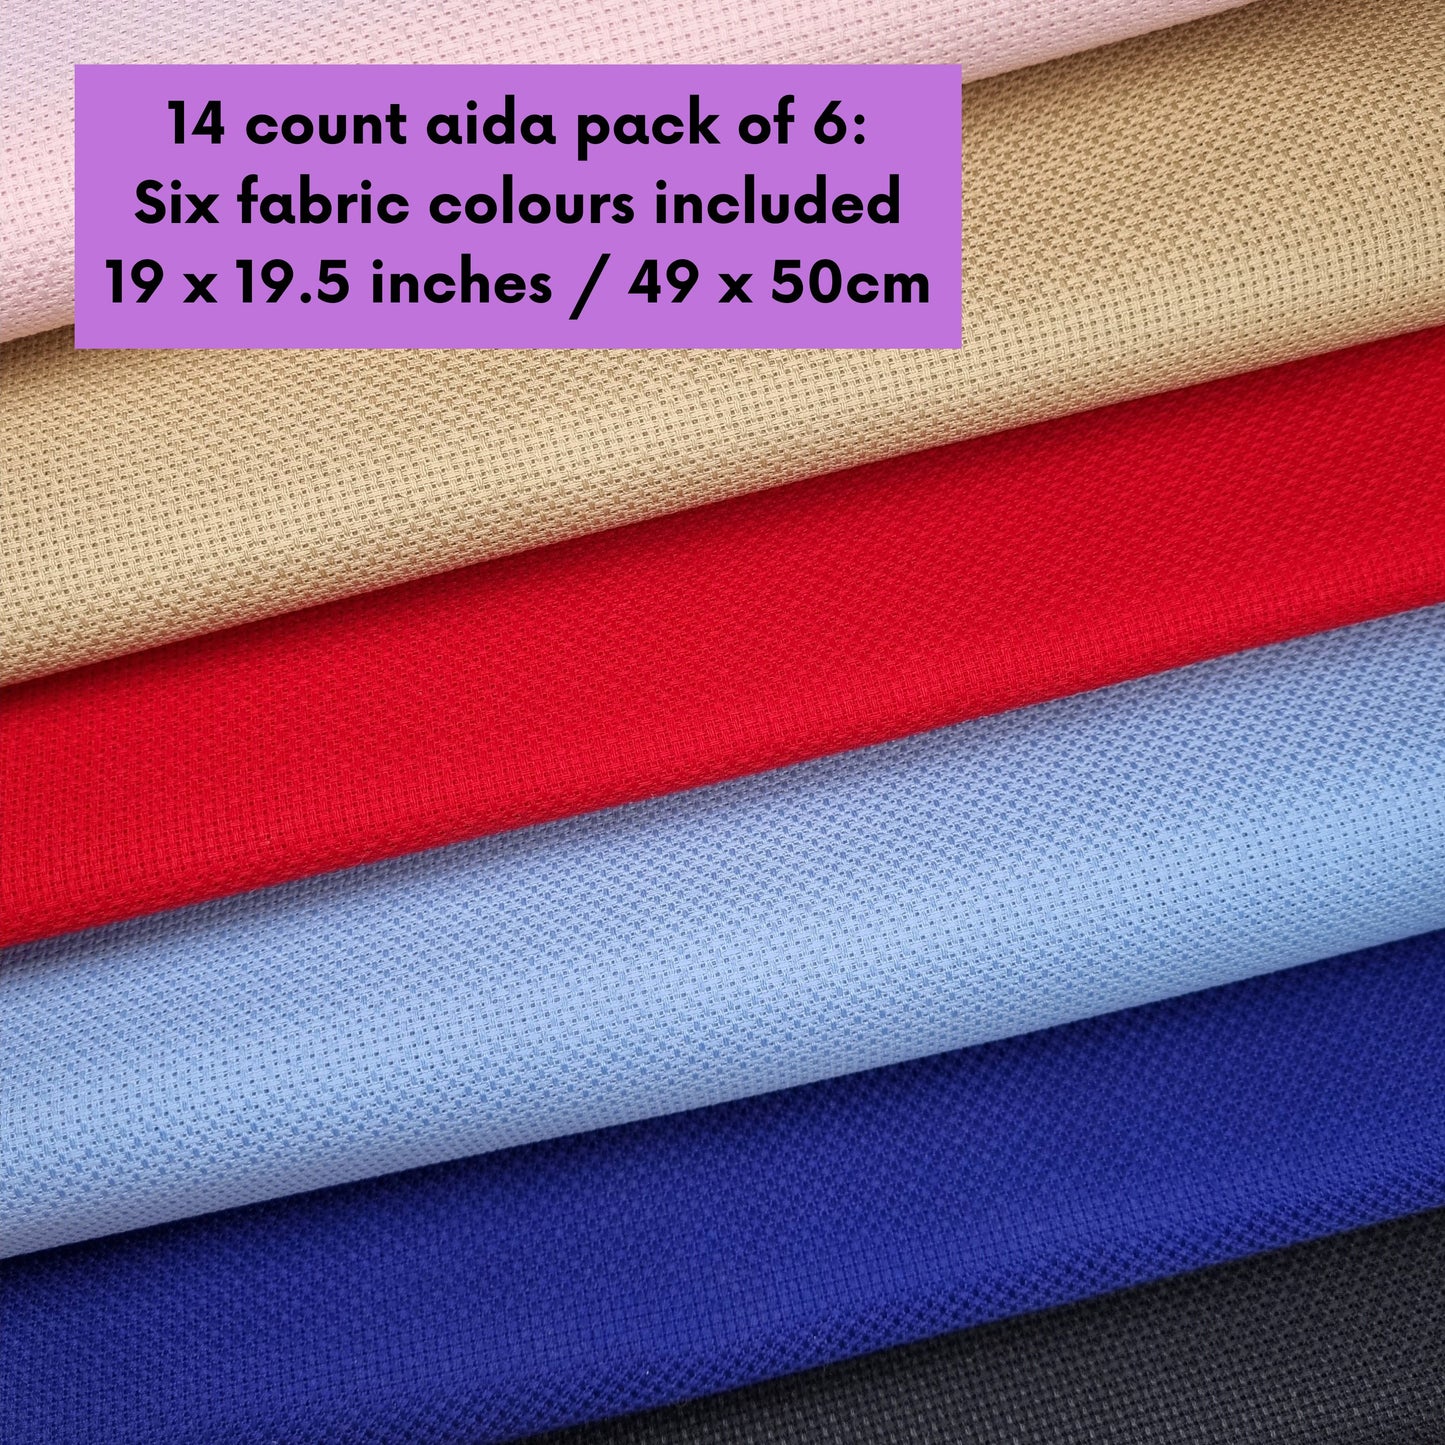 6 Piece Pack of 14 Count Coloured Aida Fabric 19 x 19.5 inches / 49 x 50cm for Cross Stitch